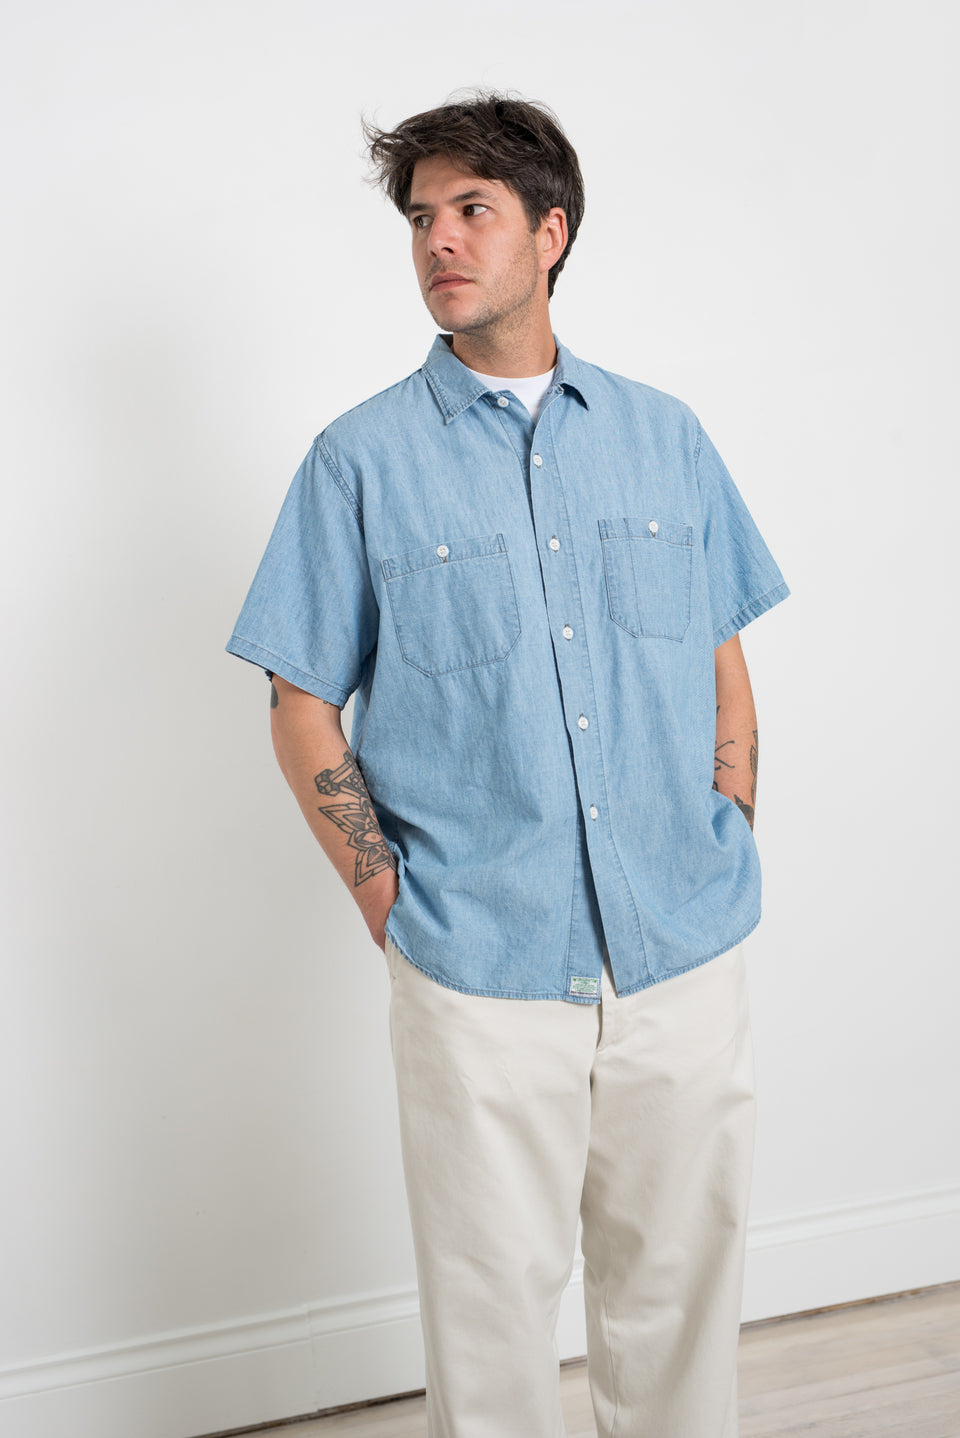 OrSlow 23SS SS23 01-0869-99 Chambray 60's Work Shirt Bleached Calculus Victoria BC Canada